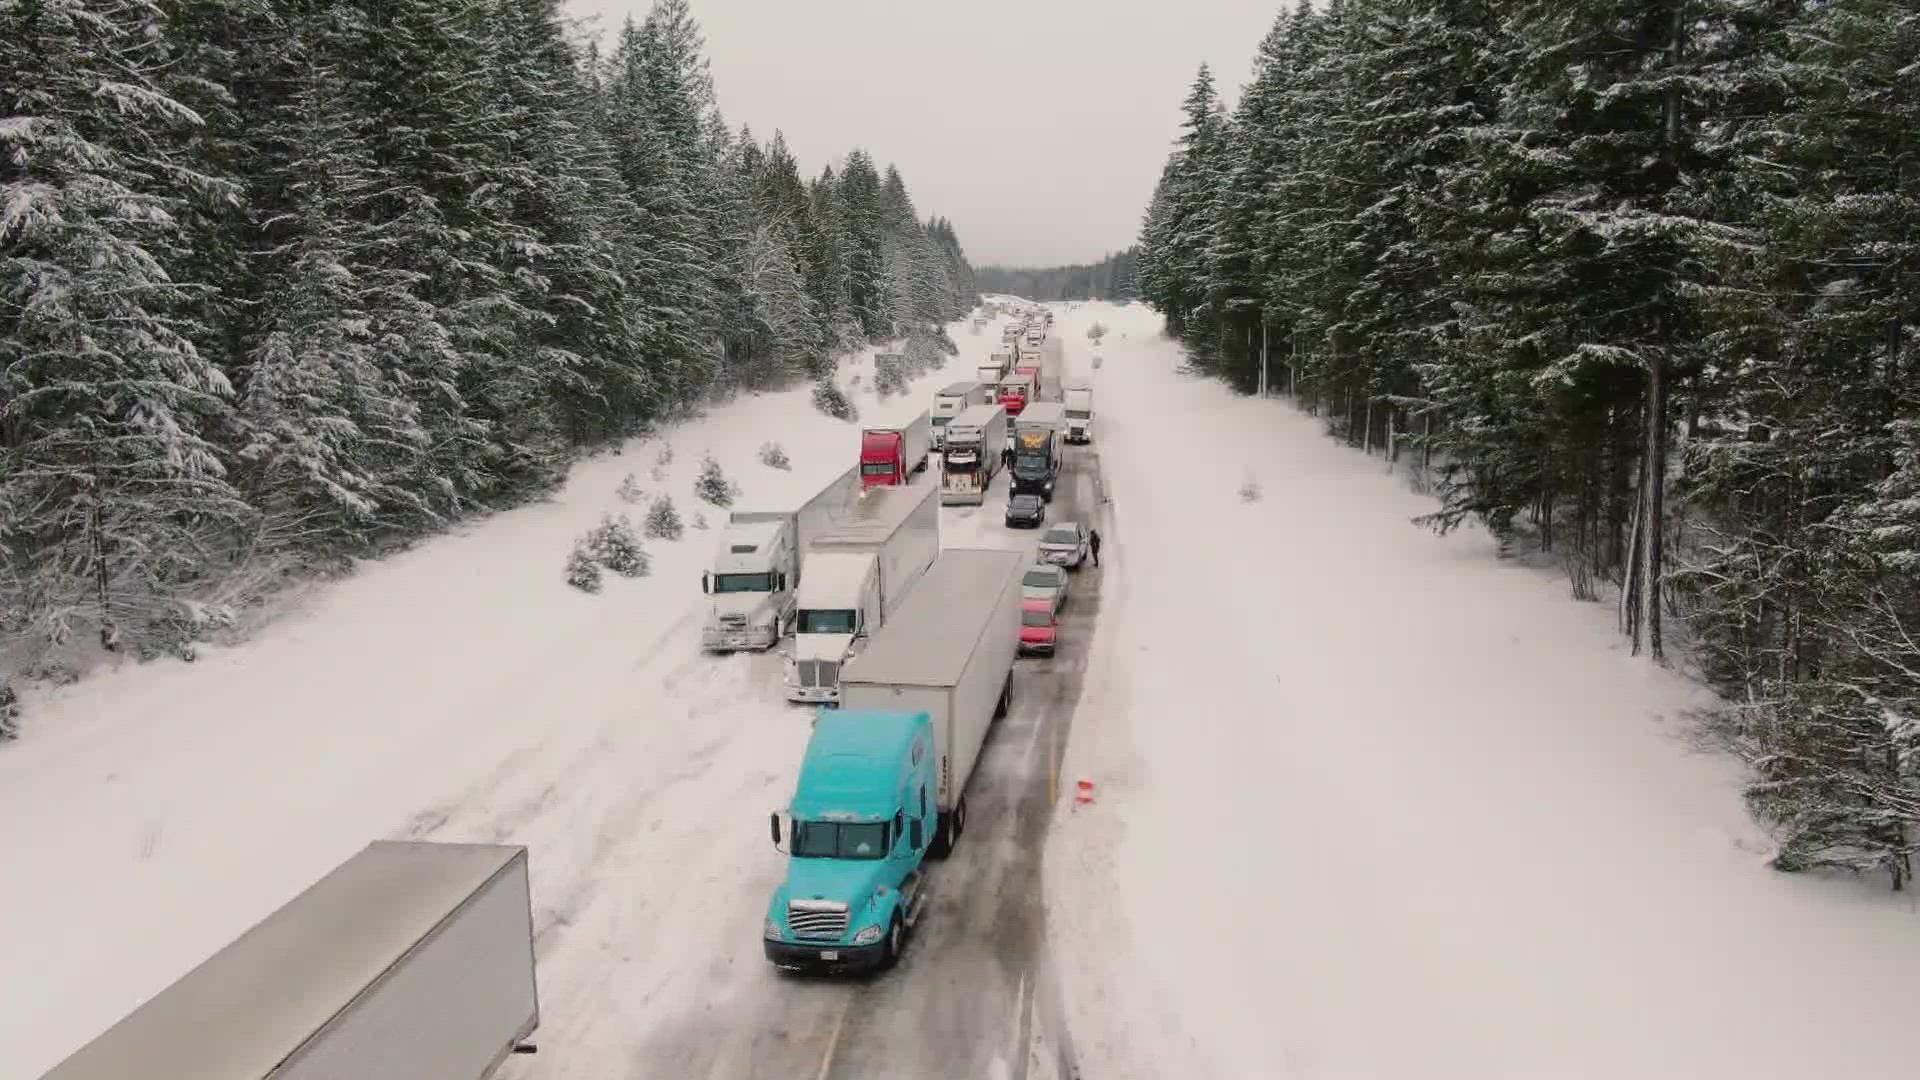 Threat of avalanche shut down I-90 over Snoqualmie Pass.